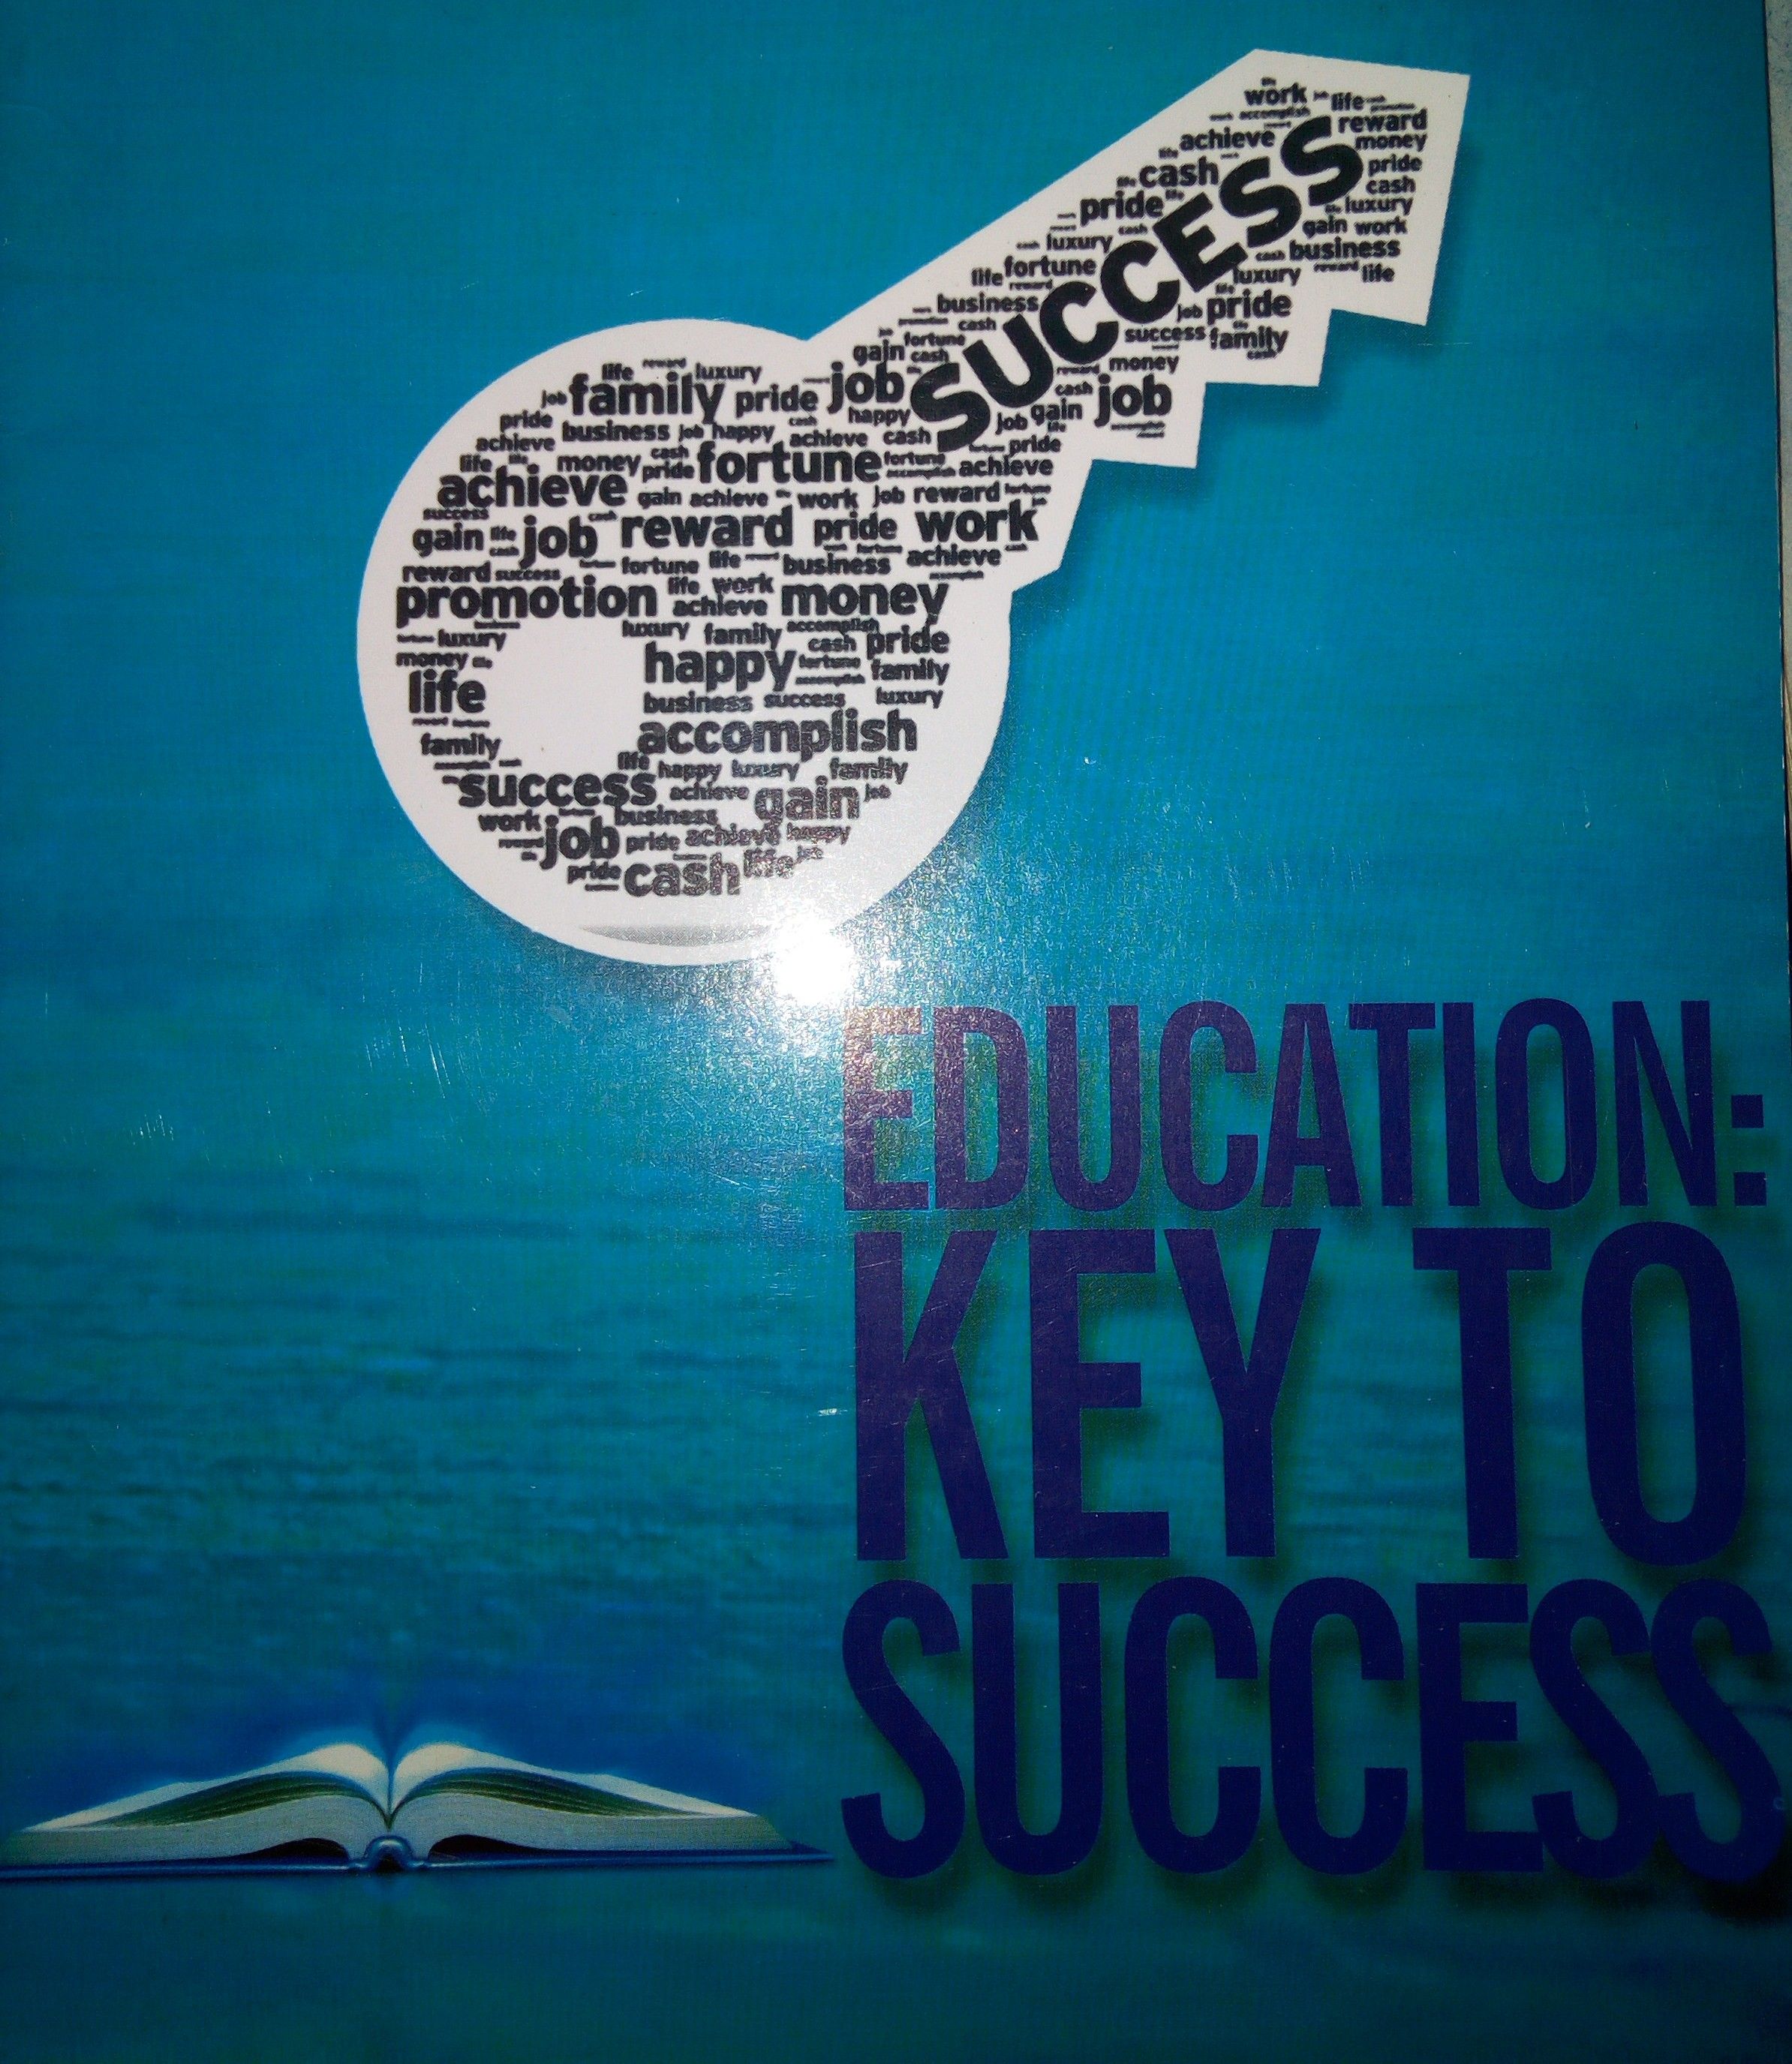 Essay on education is the key to success